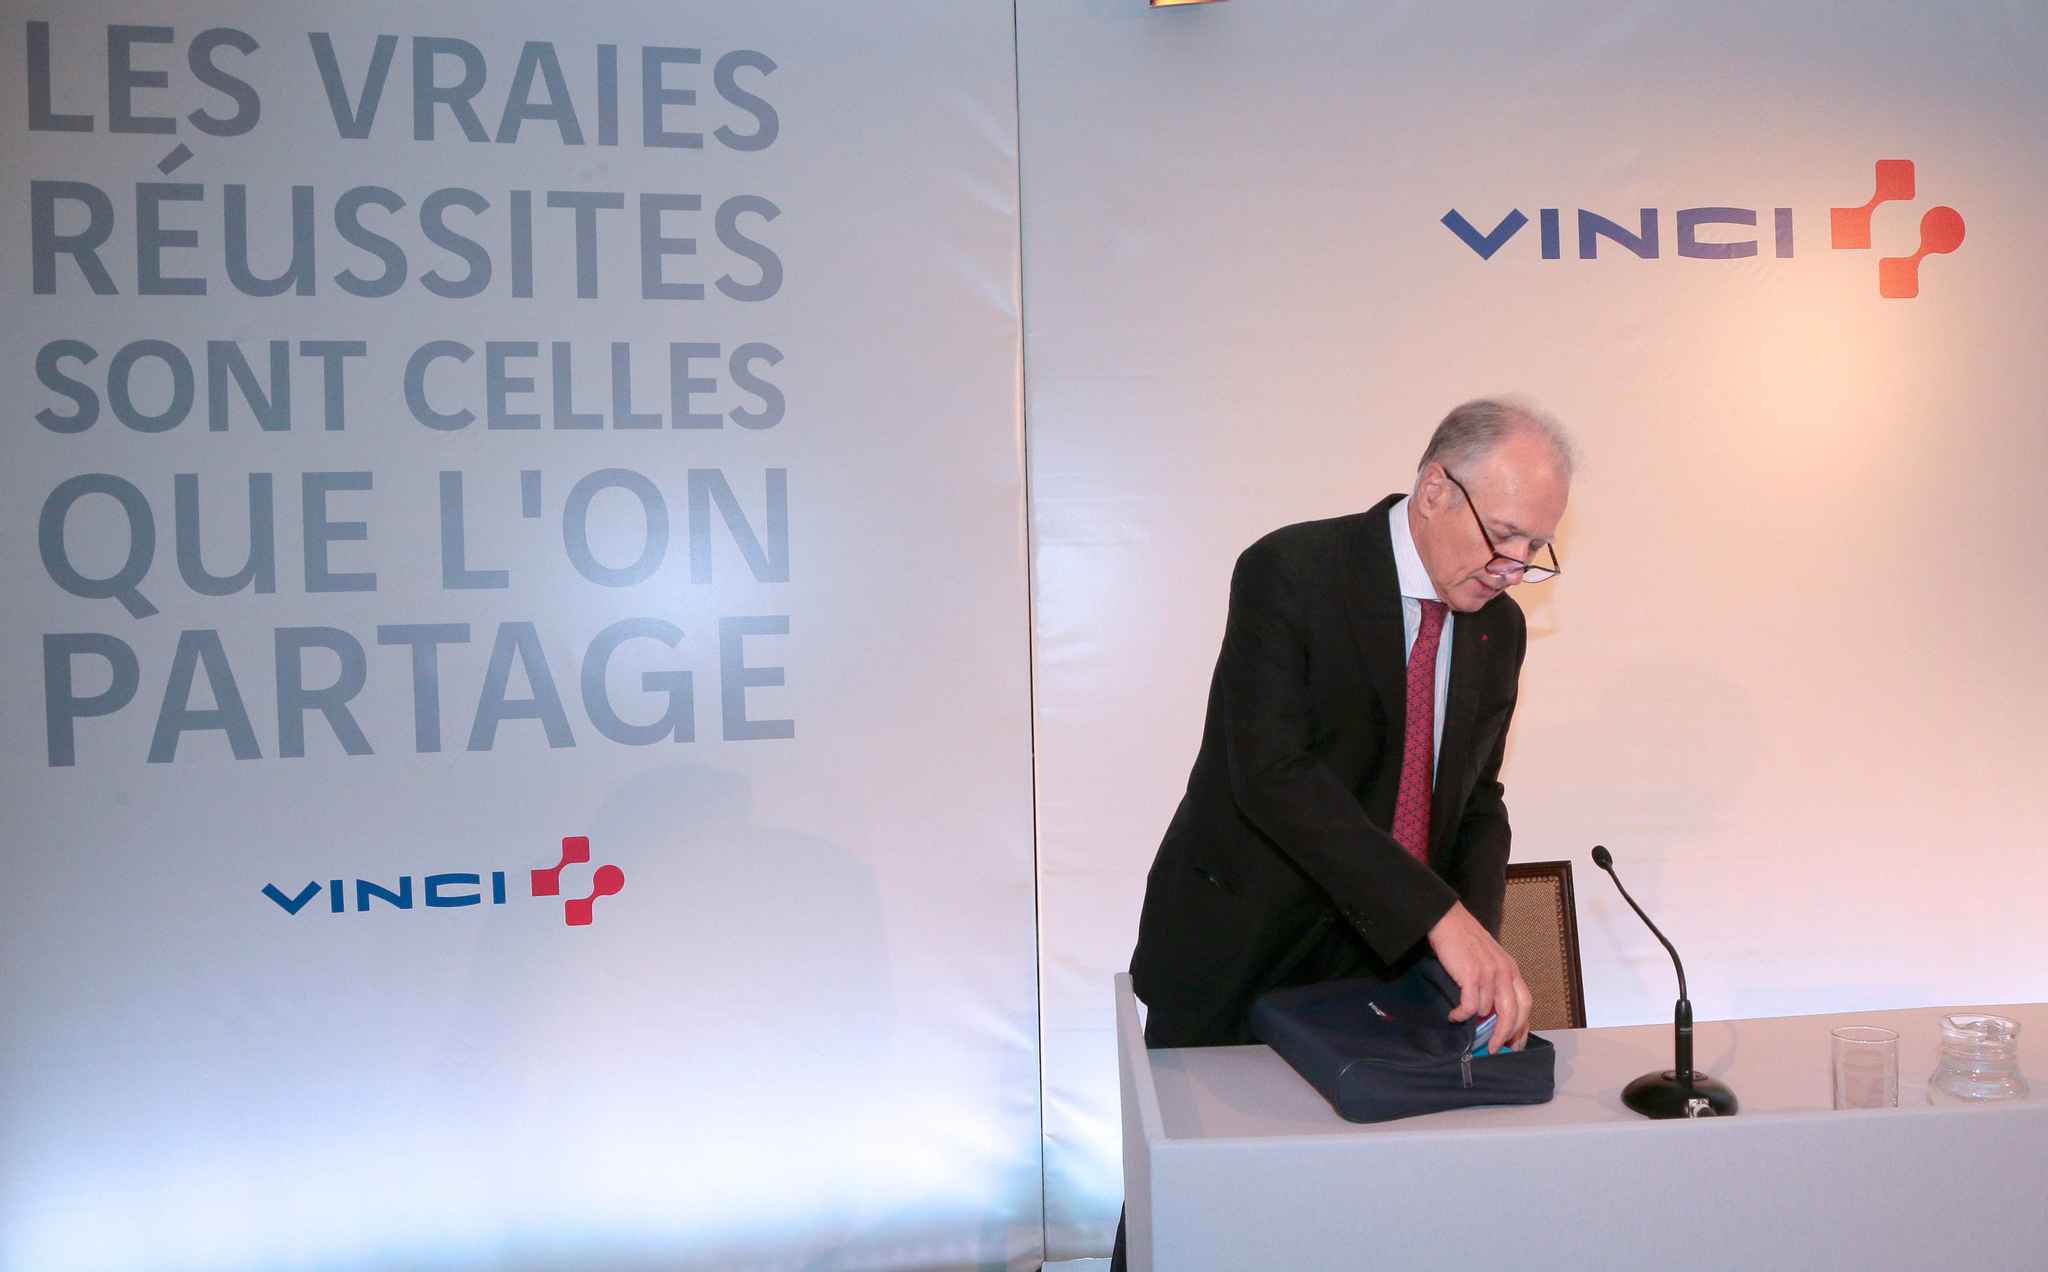 2048x1536-fit_french-concessions-and-construction-company-vinci-ceo-xavier-huillp-xavier-huillard-readies-to-speak